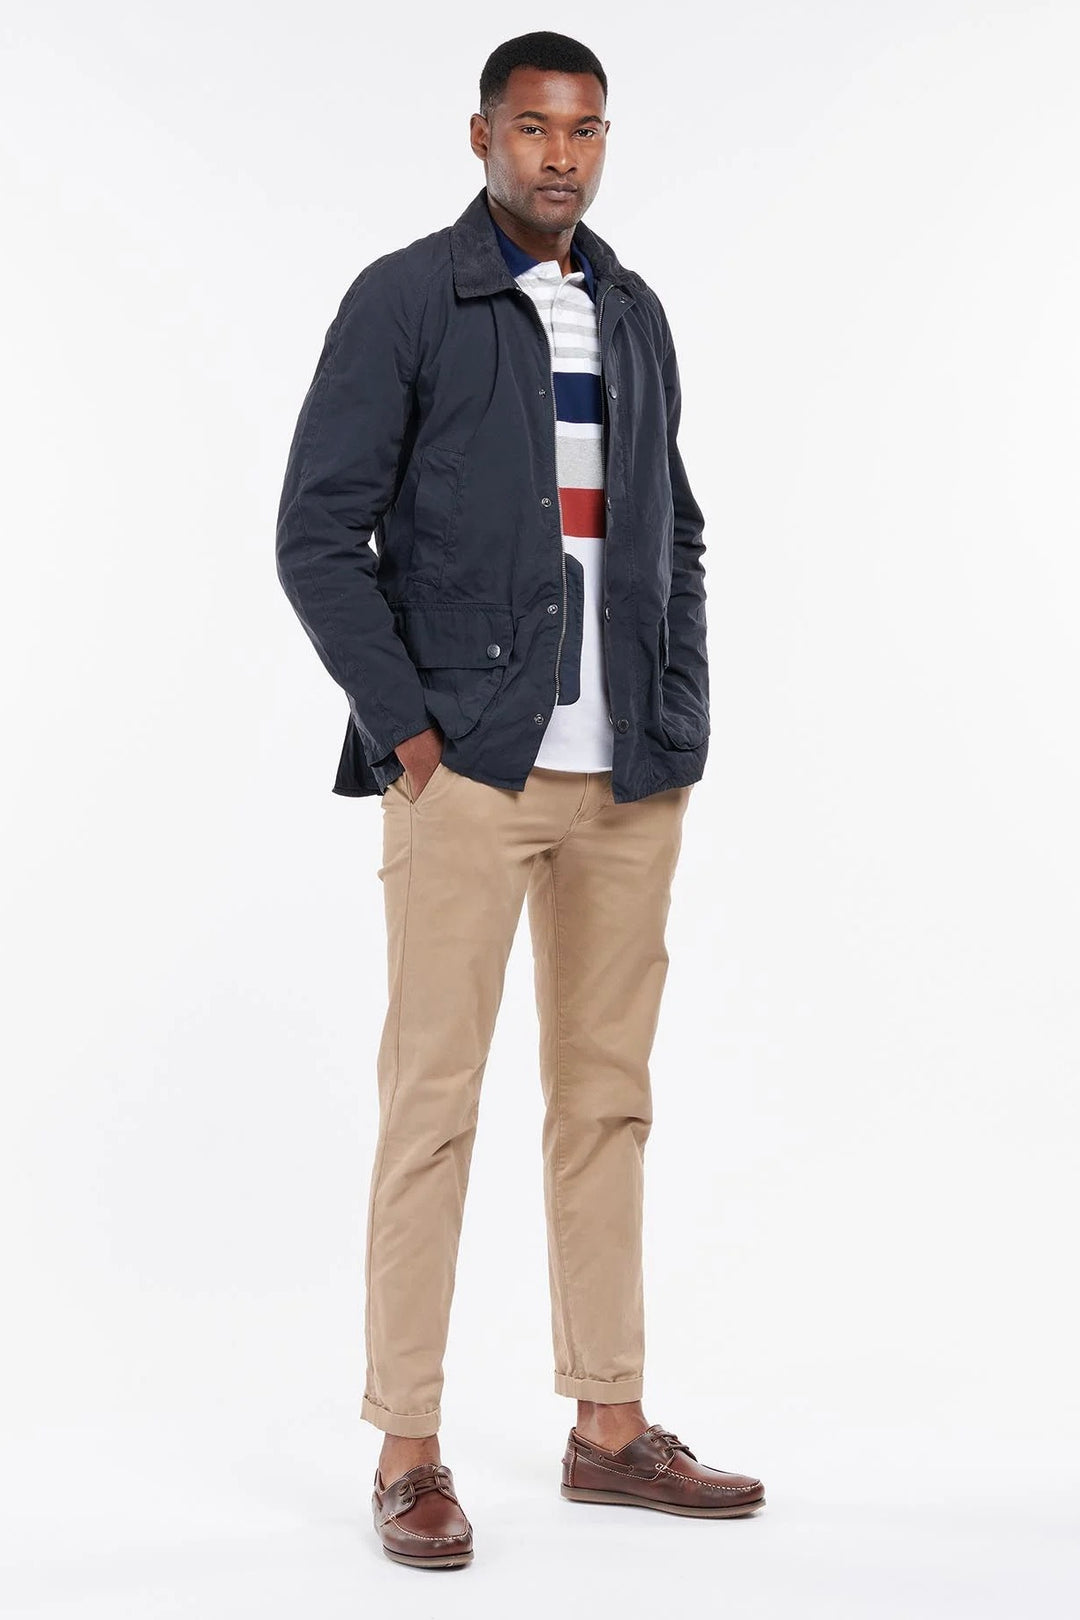 BARBOUR - Ashby Casual Navy - Dale